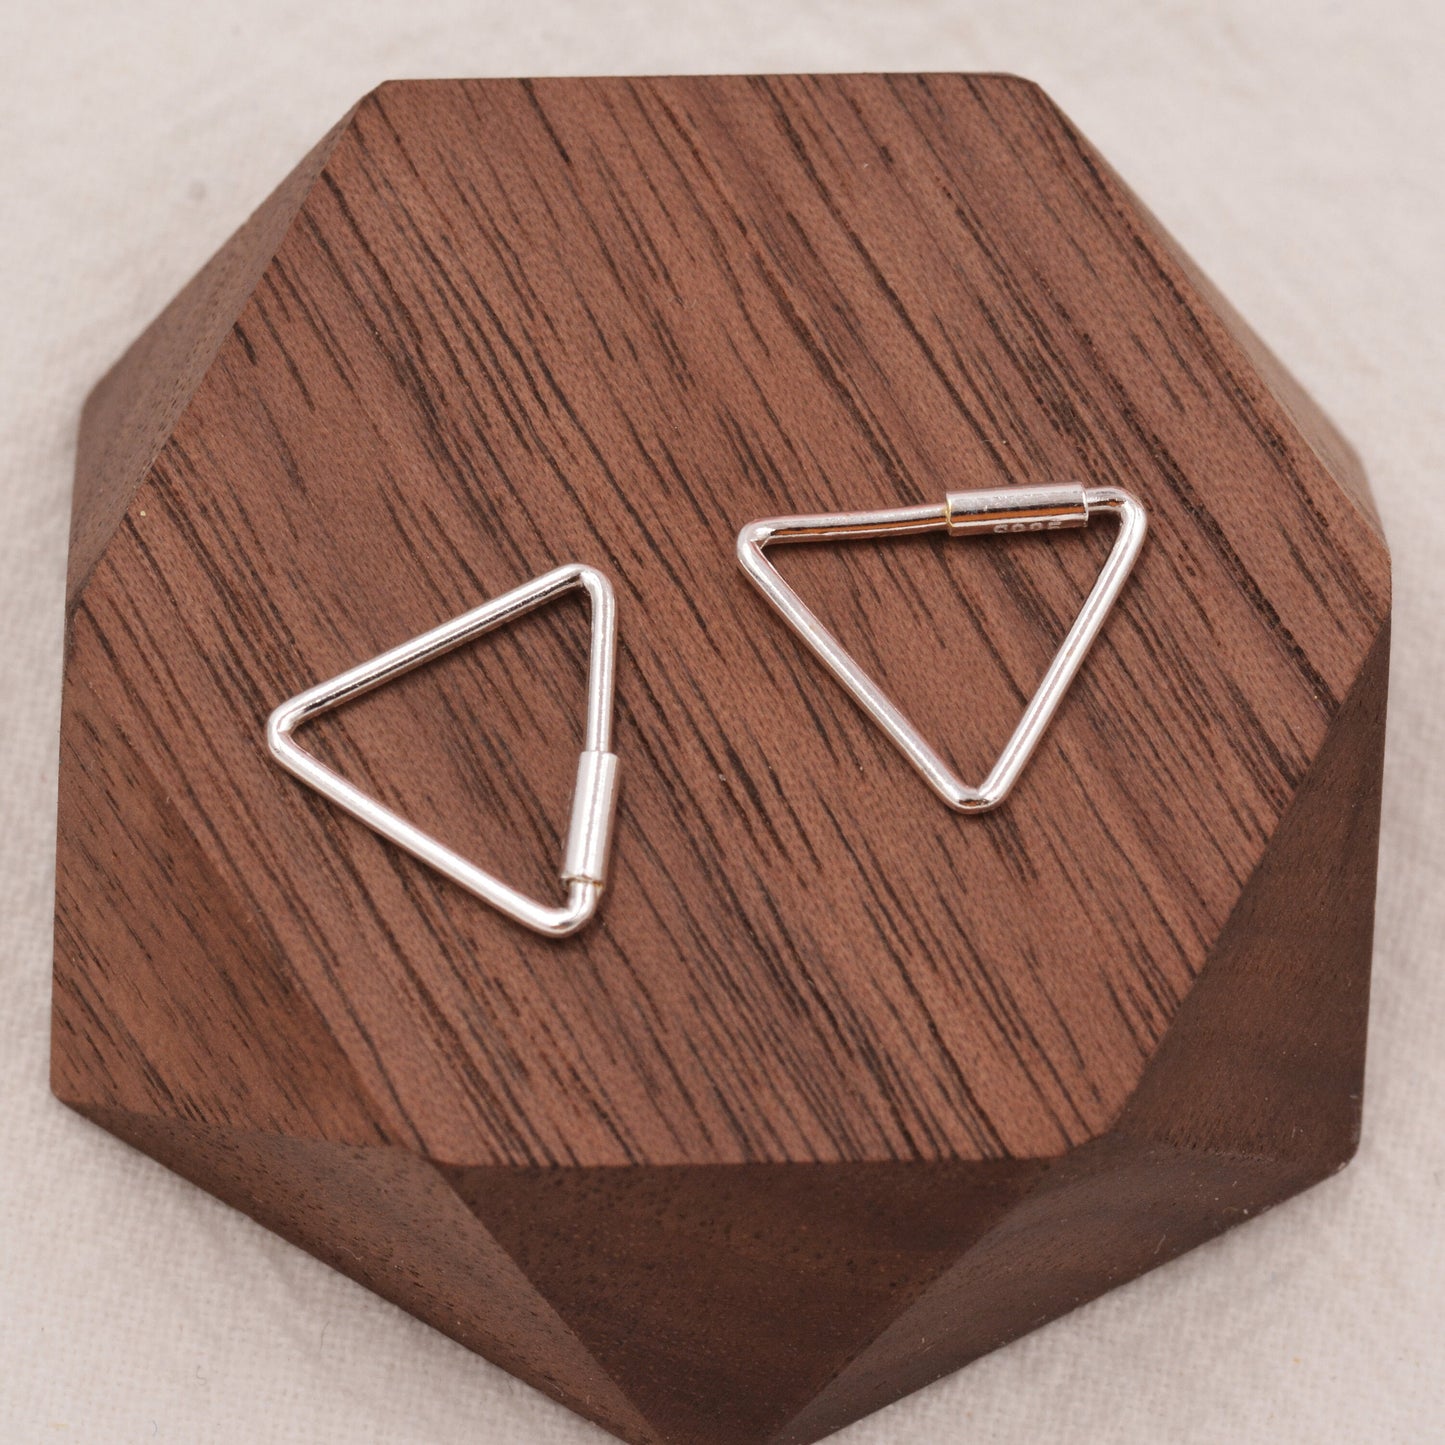 Sterling Silver Minimalist Geometric Square and Triangle Hoop Creole Style Earrings, Dainty and Delicate, Modern Contemporary Design